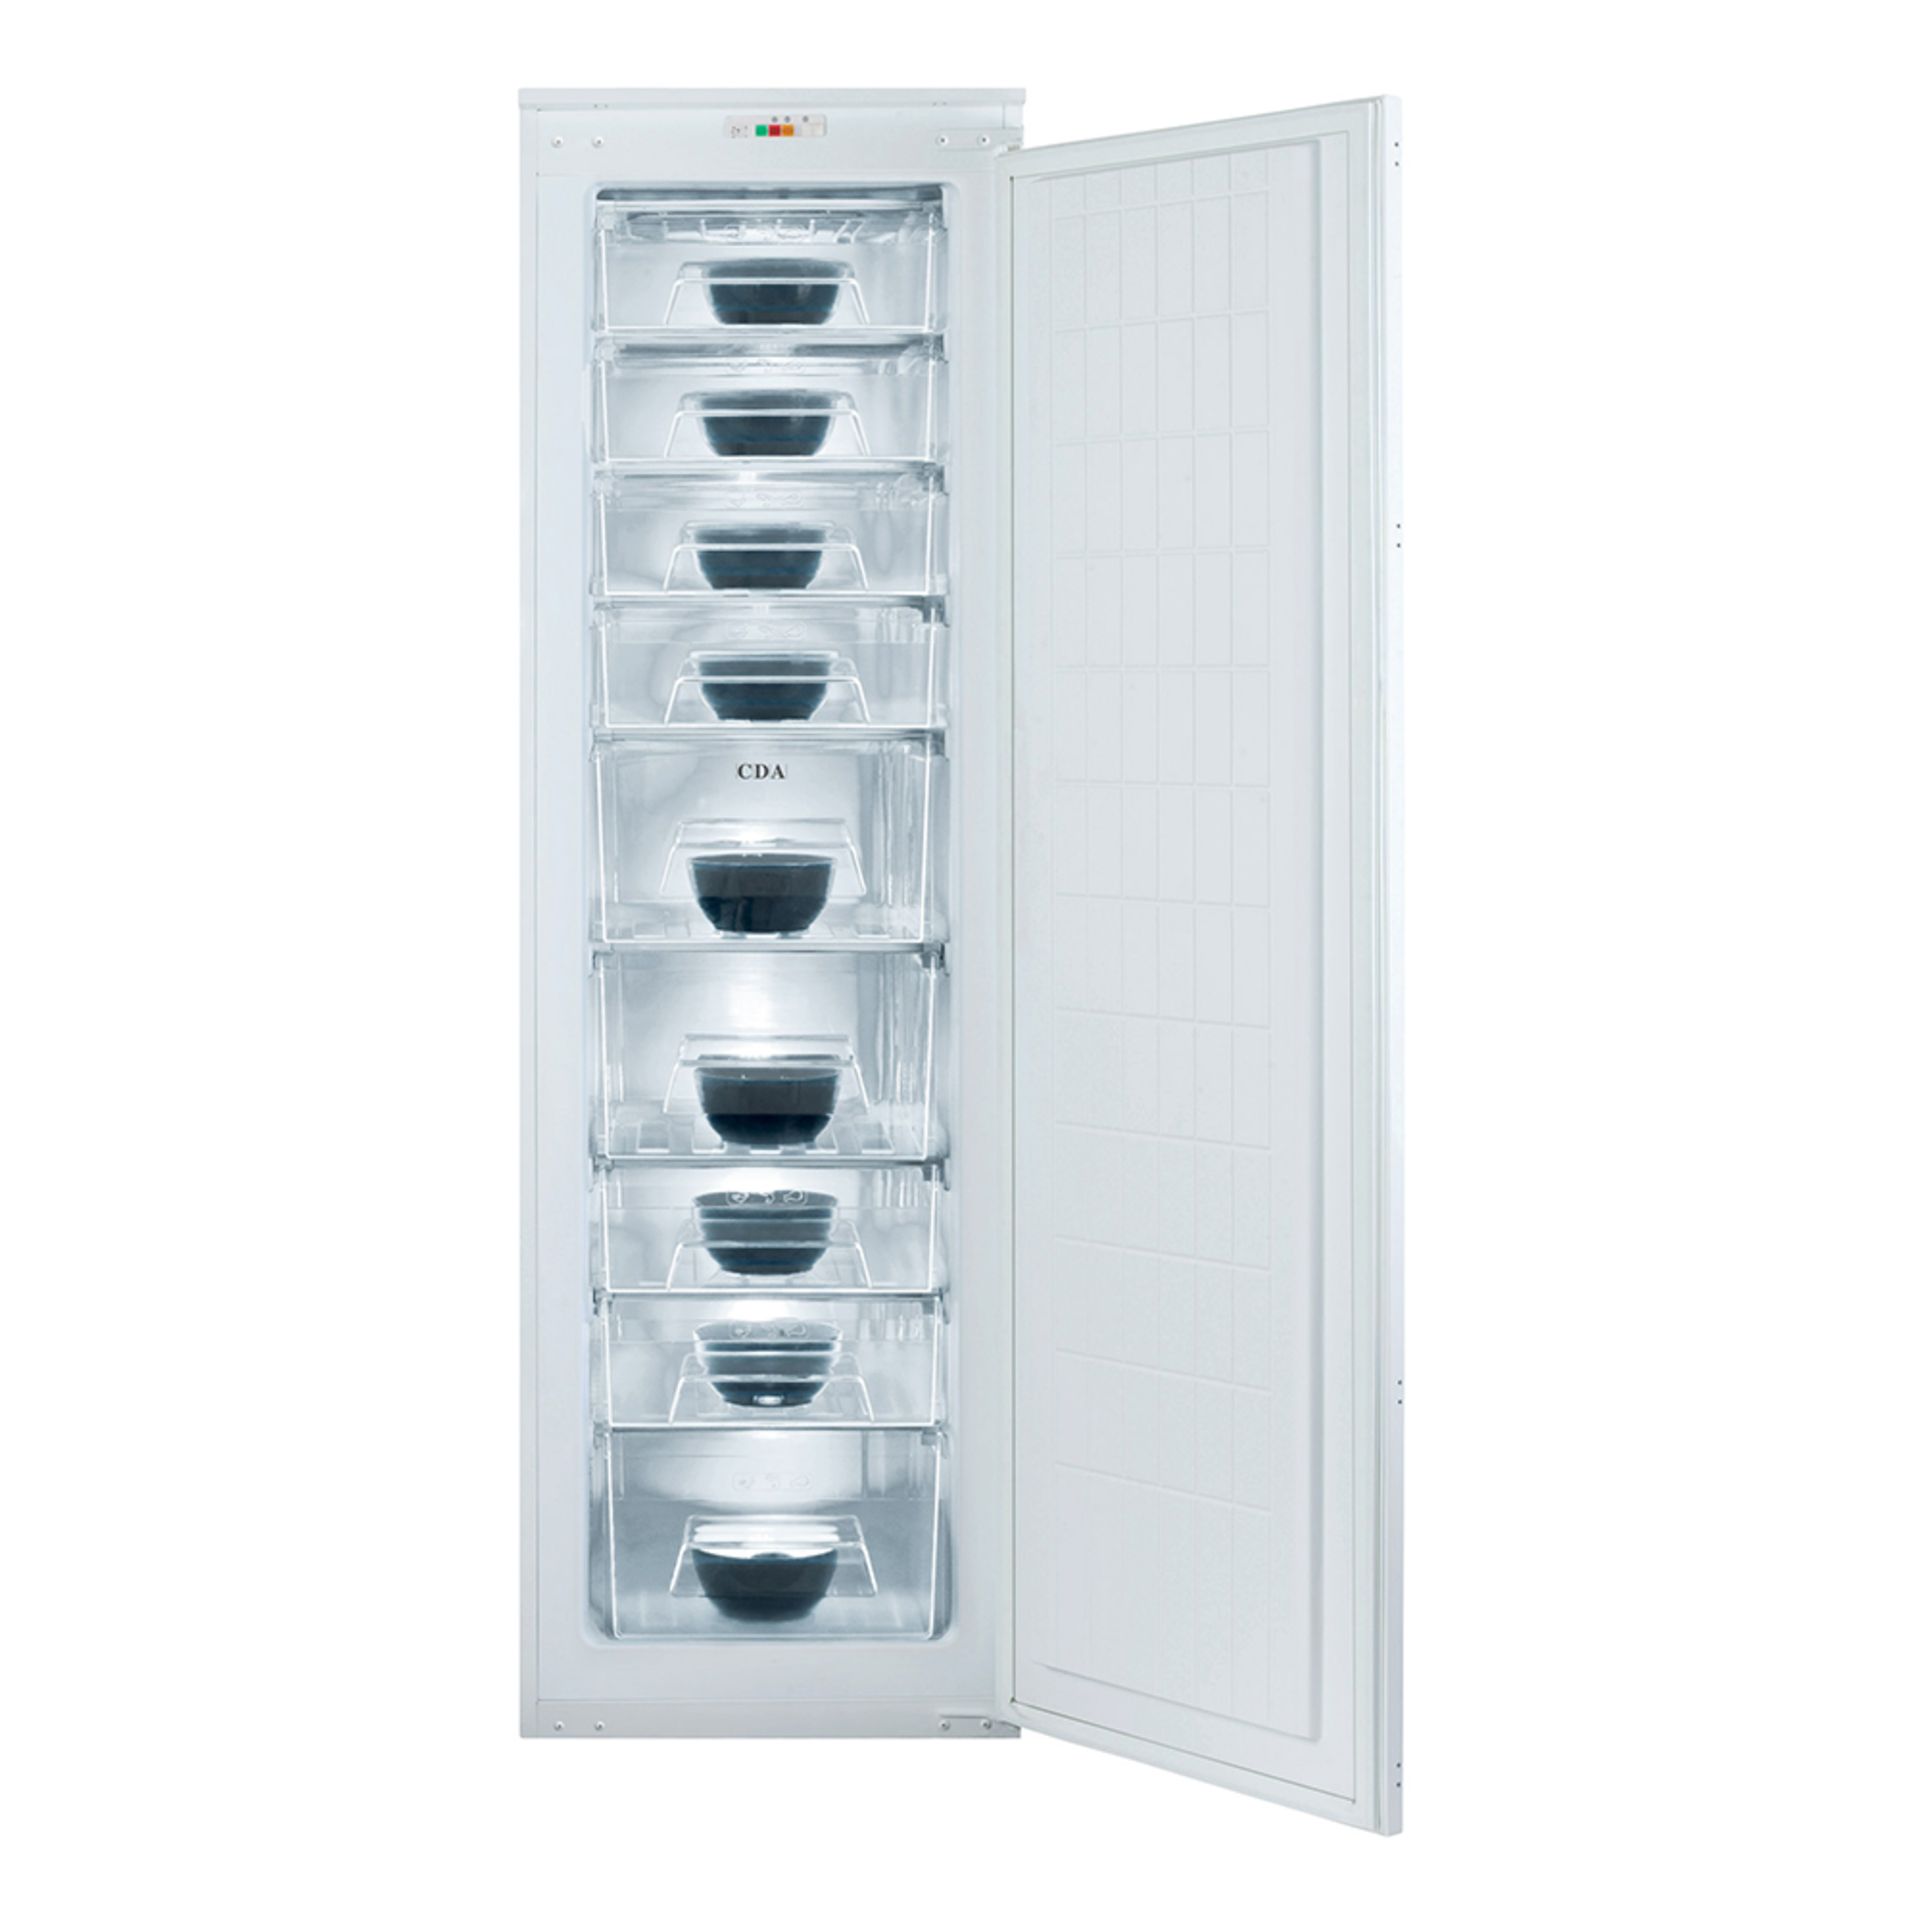 + VAT Brand New CDA FW881 Built In White Freezer - A+ Energy Rating - 228L Capacity - High